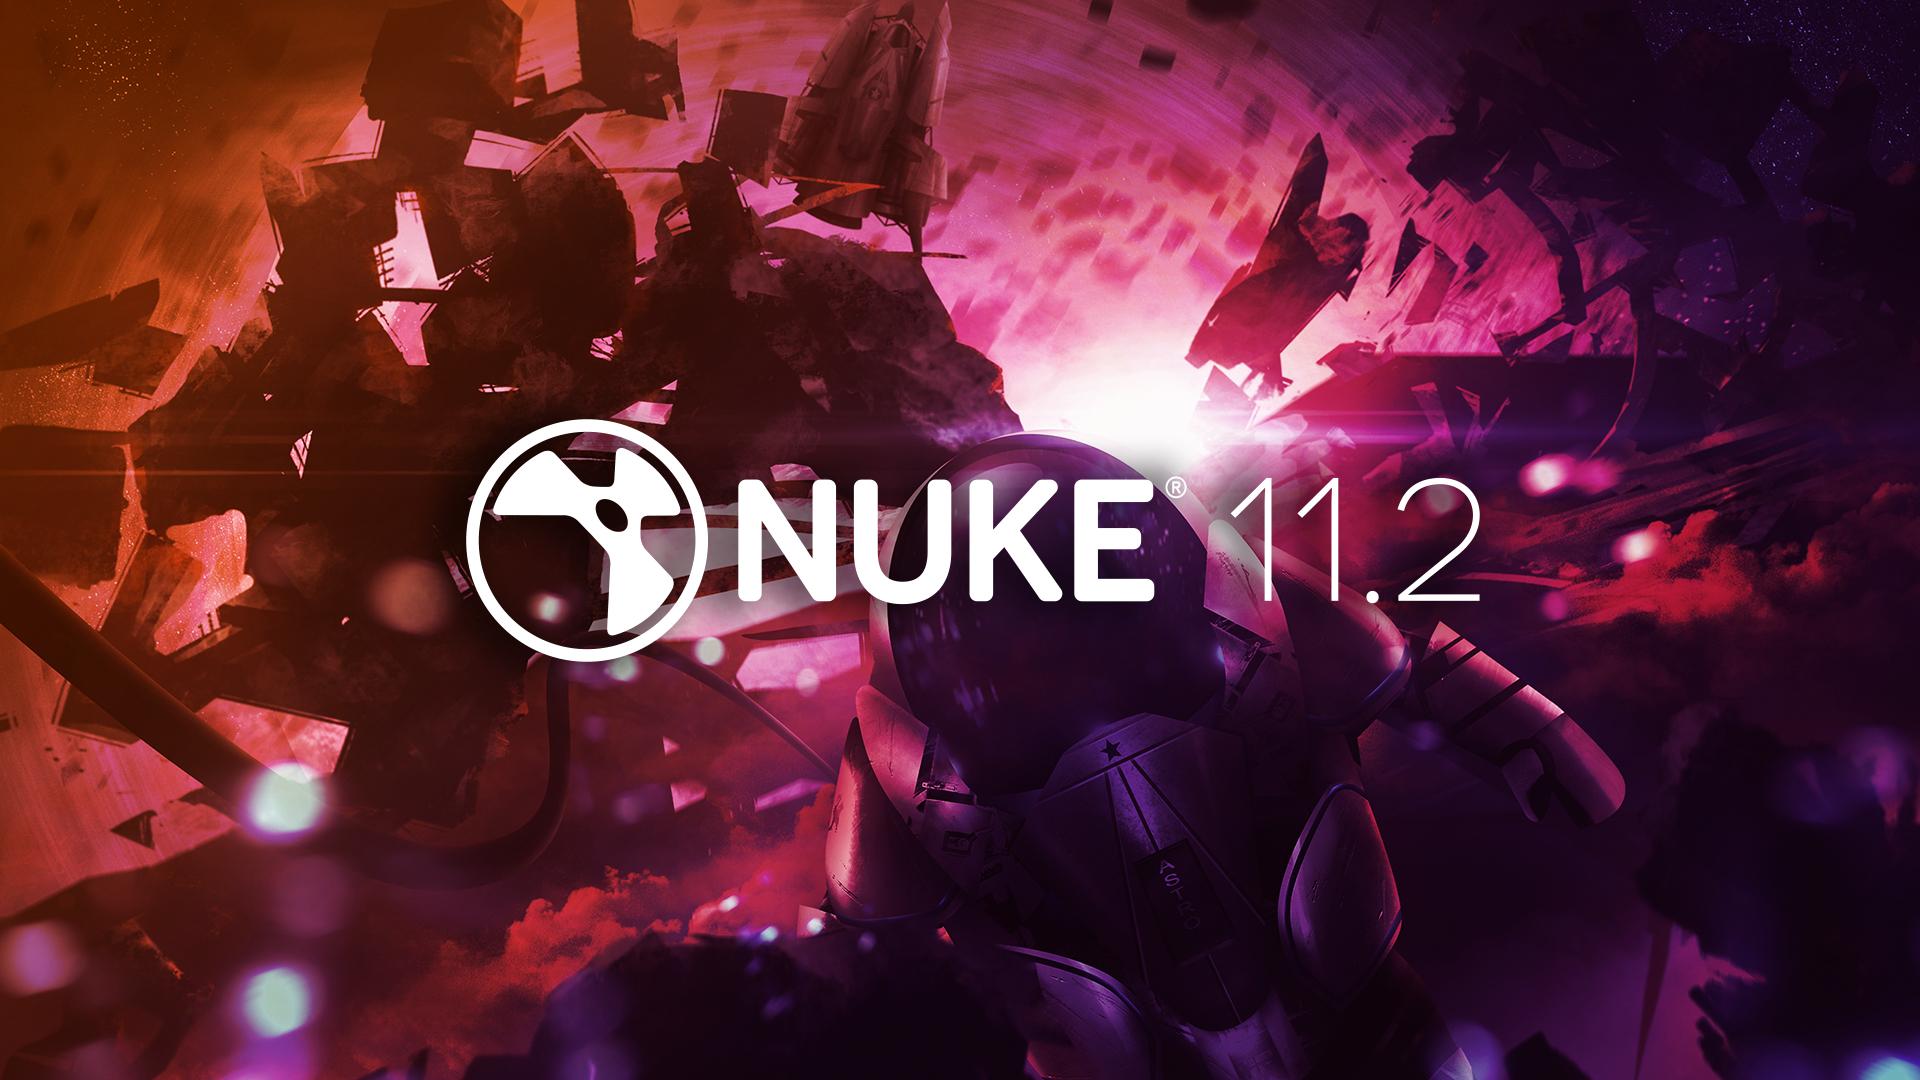 Nuke 11.2 is out